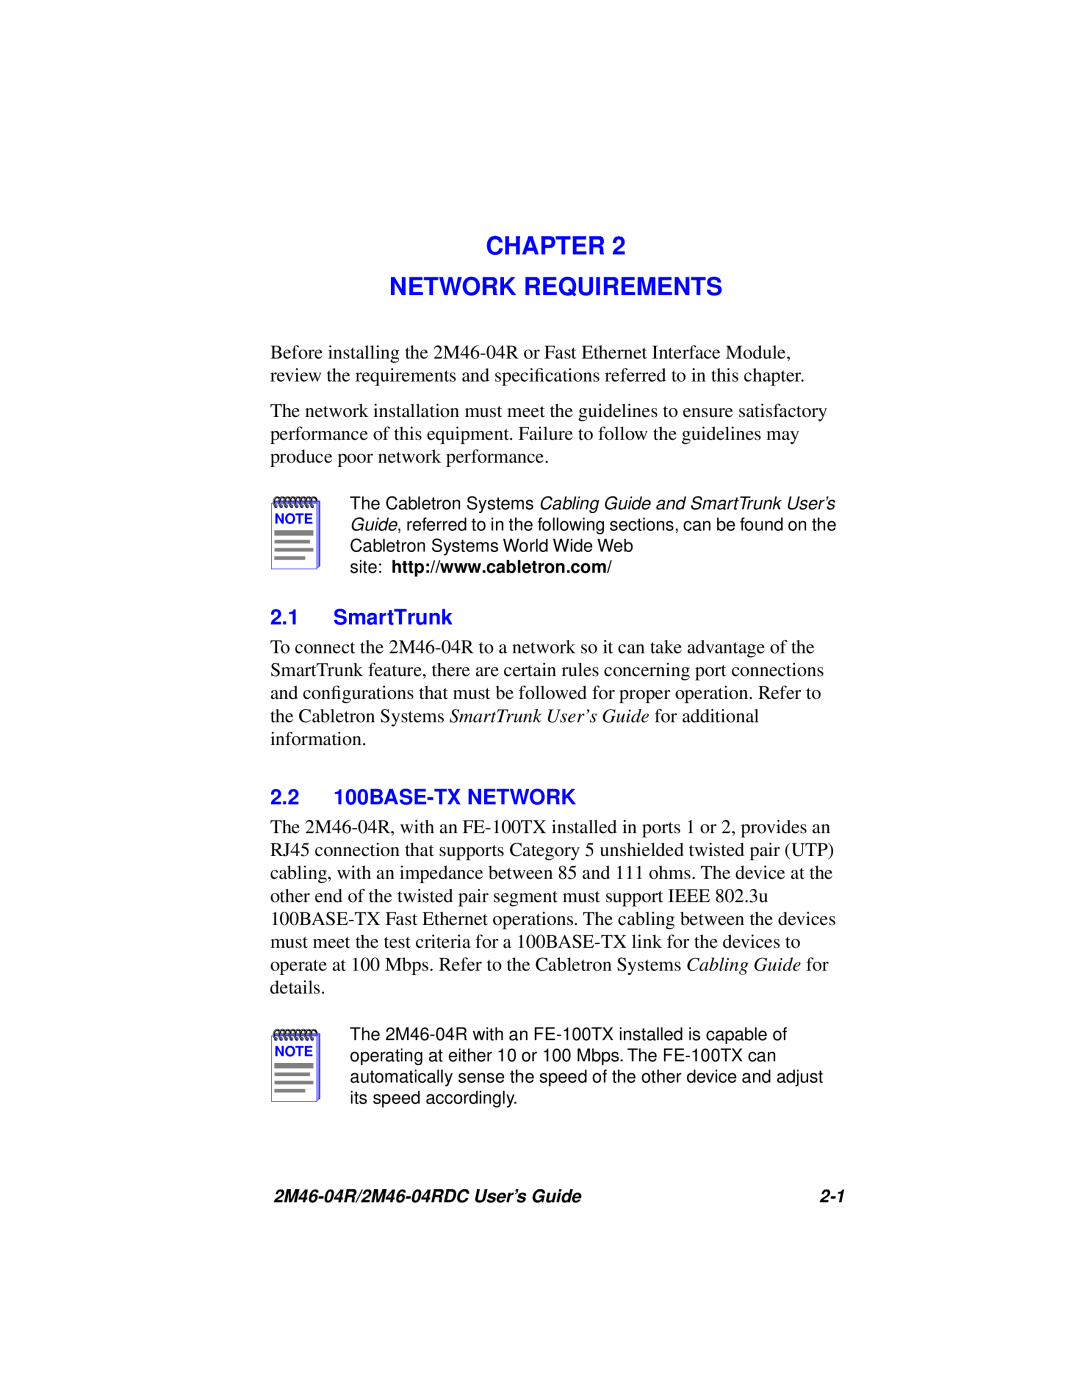 Cabletron Systems pmn manual Chapter Network Requirements, SmartTrunk, 2.2 100BASE-TX NETWORK 